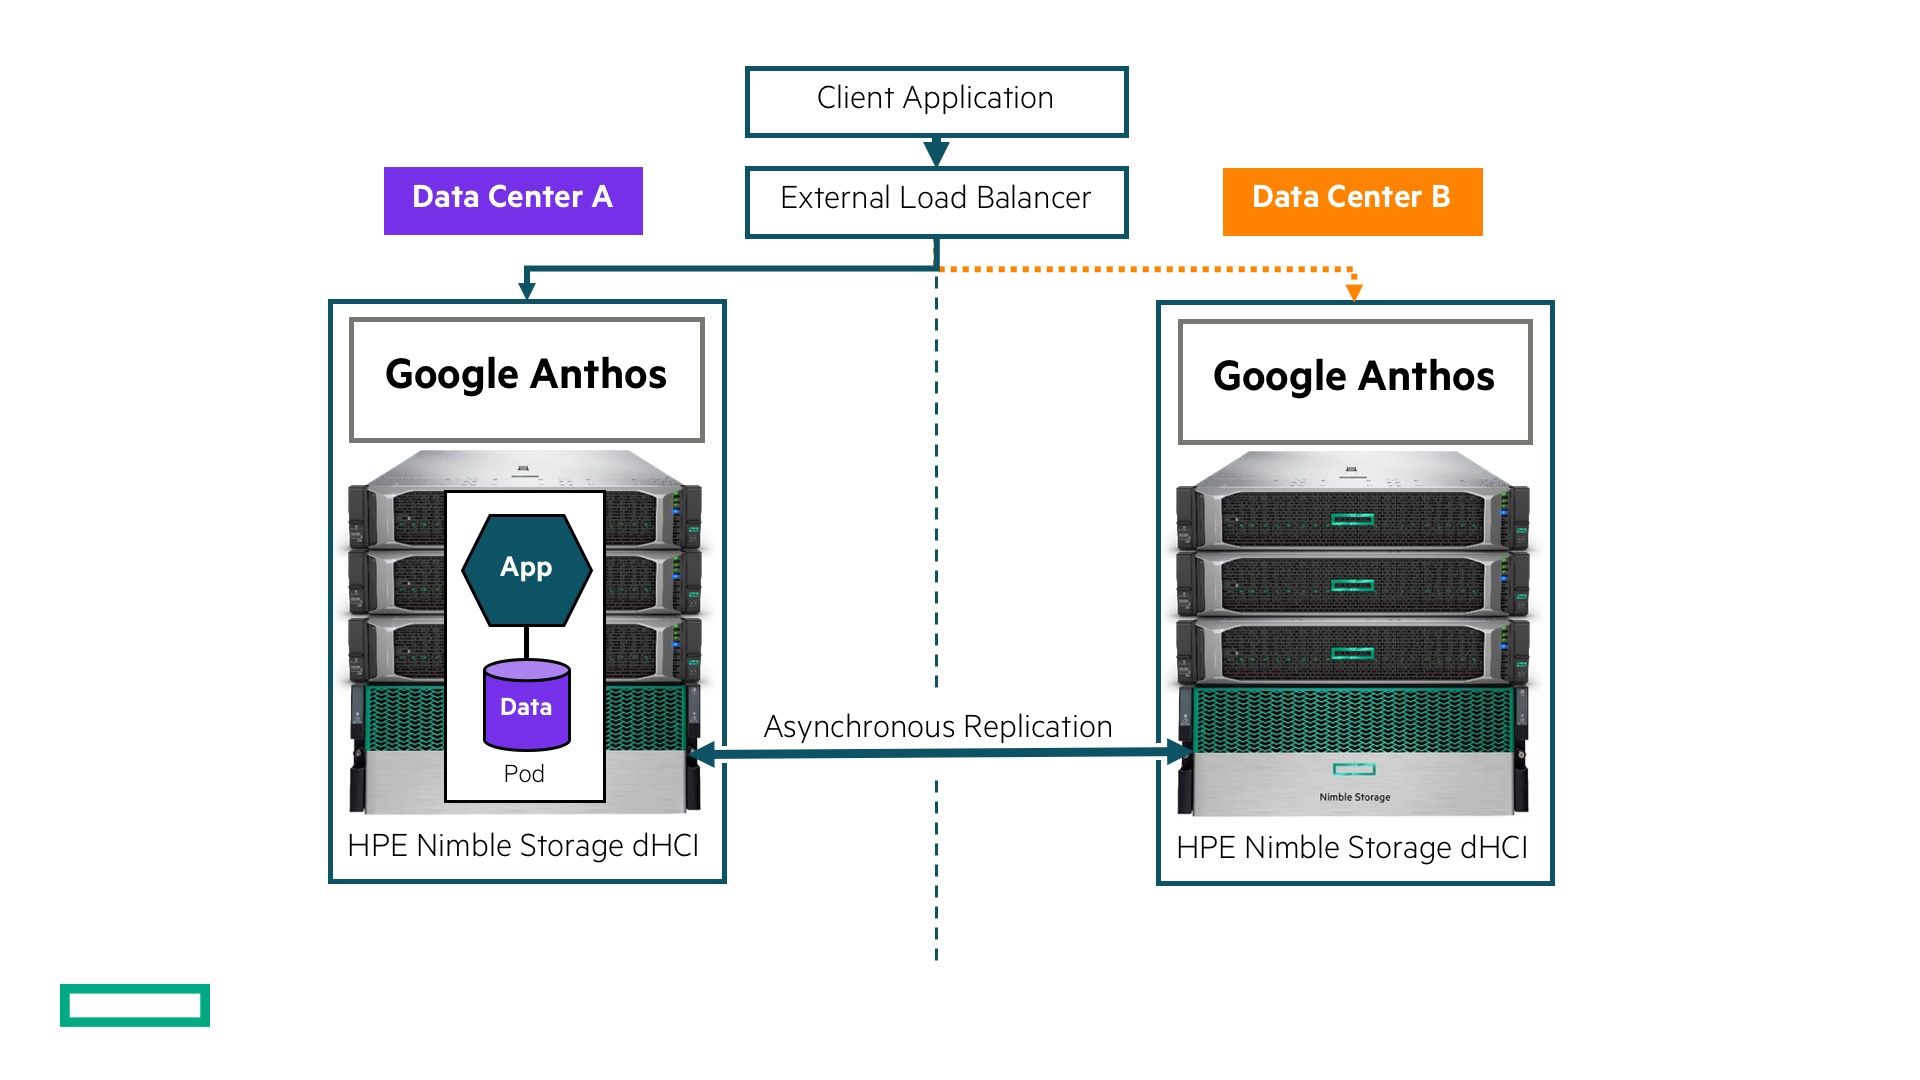 Transitioning workloads between HPE Nimble Storage dHCI systems